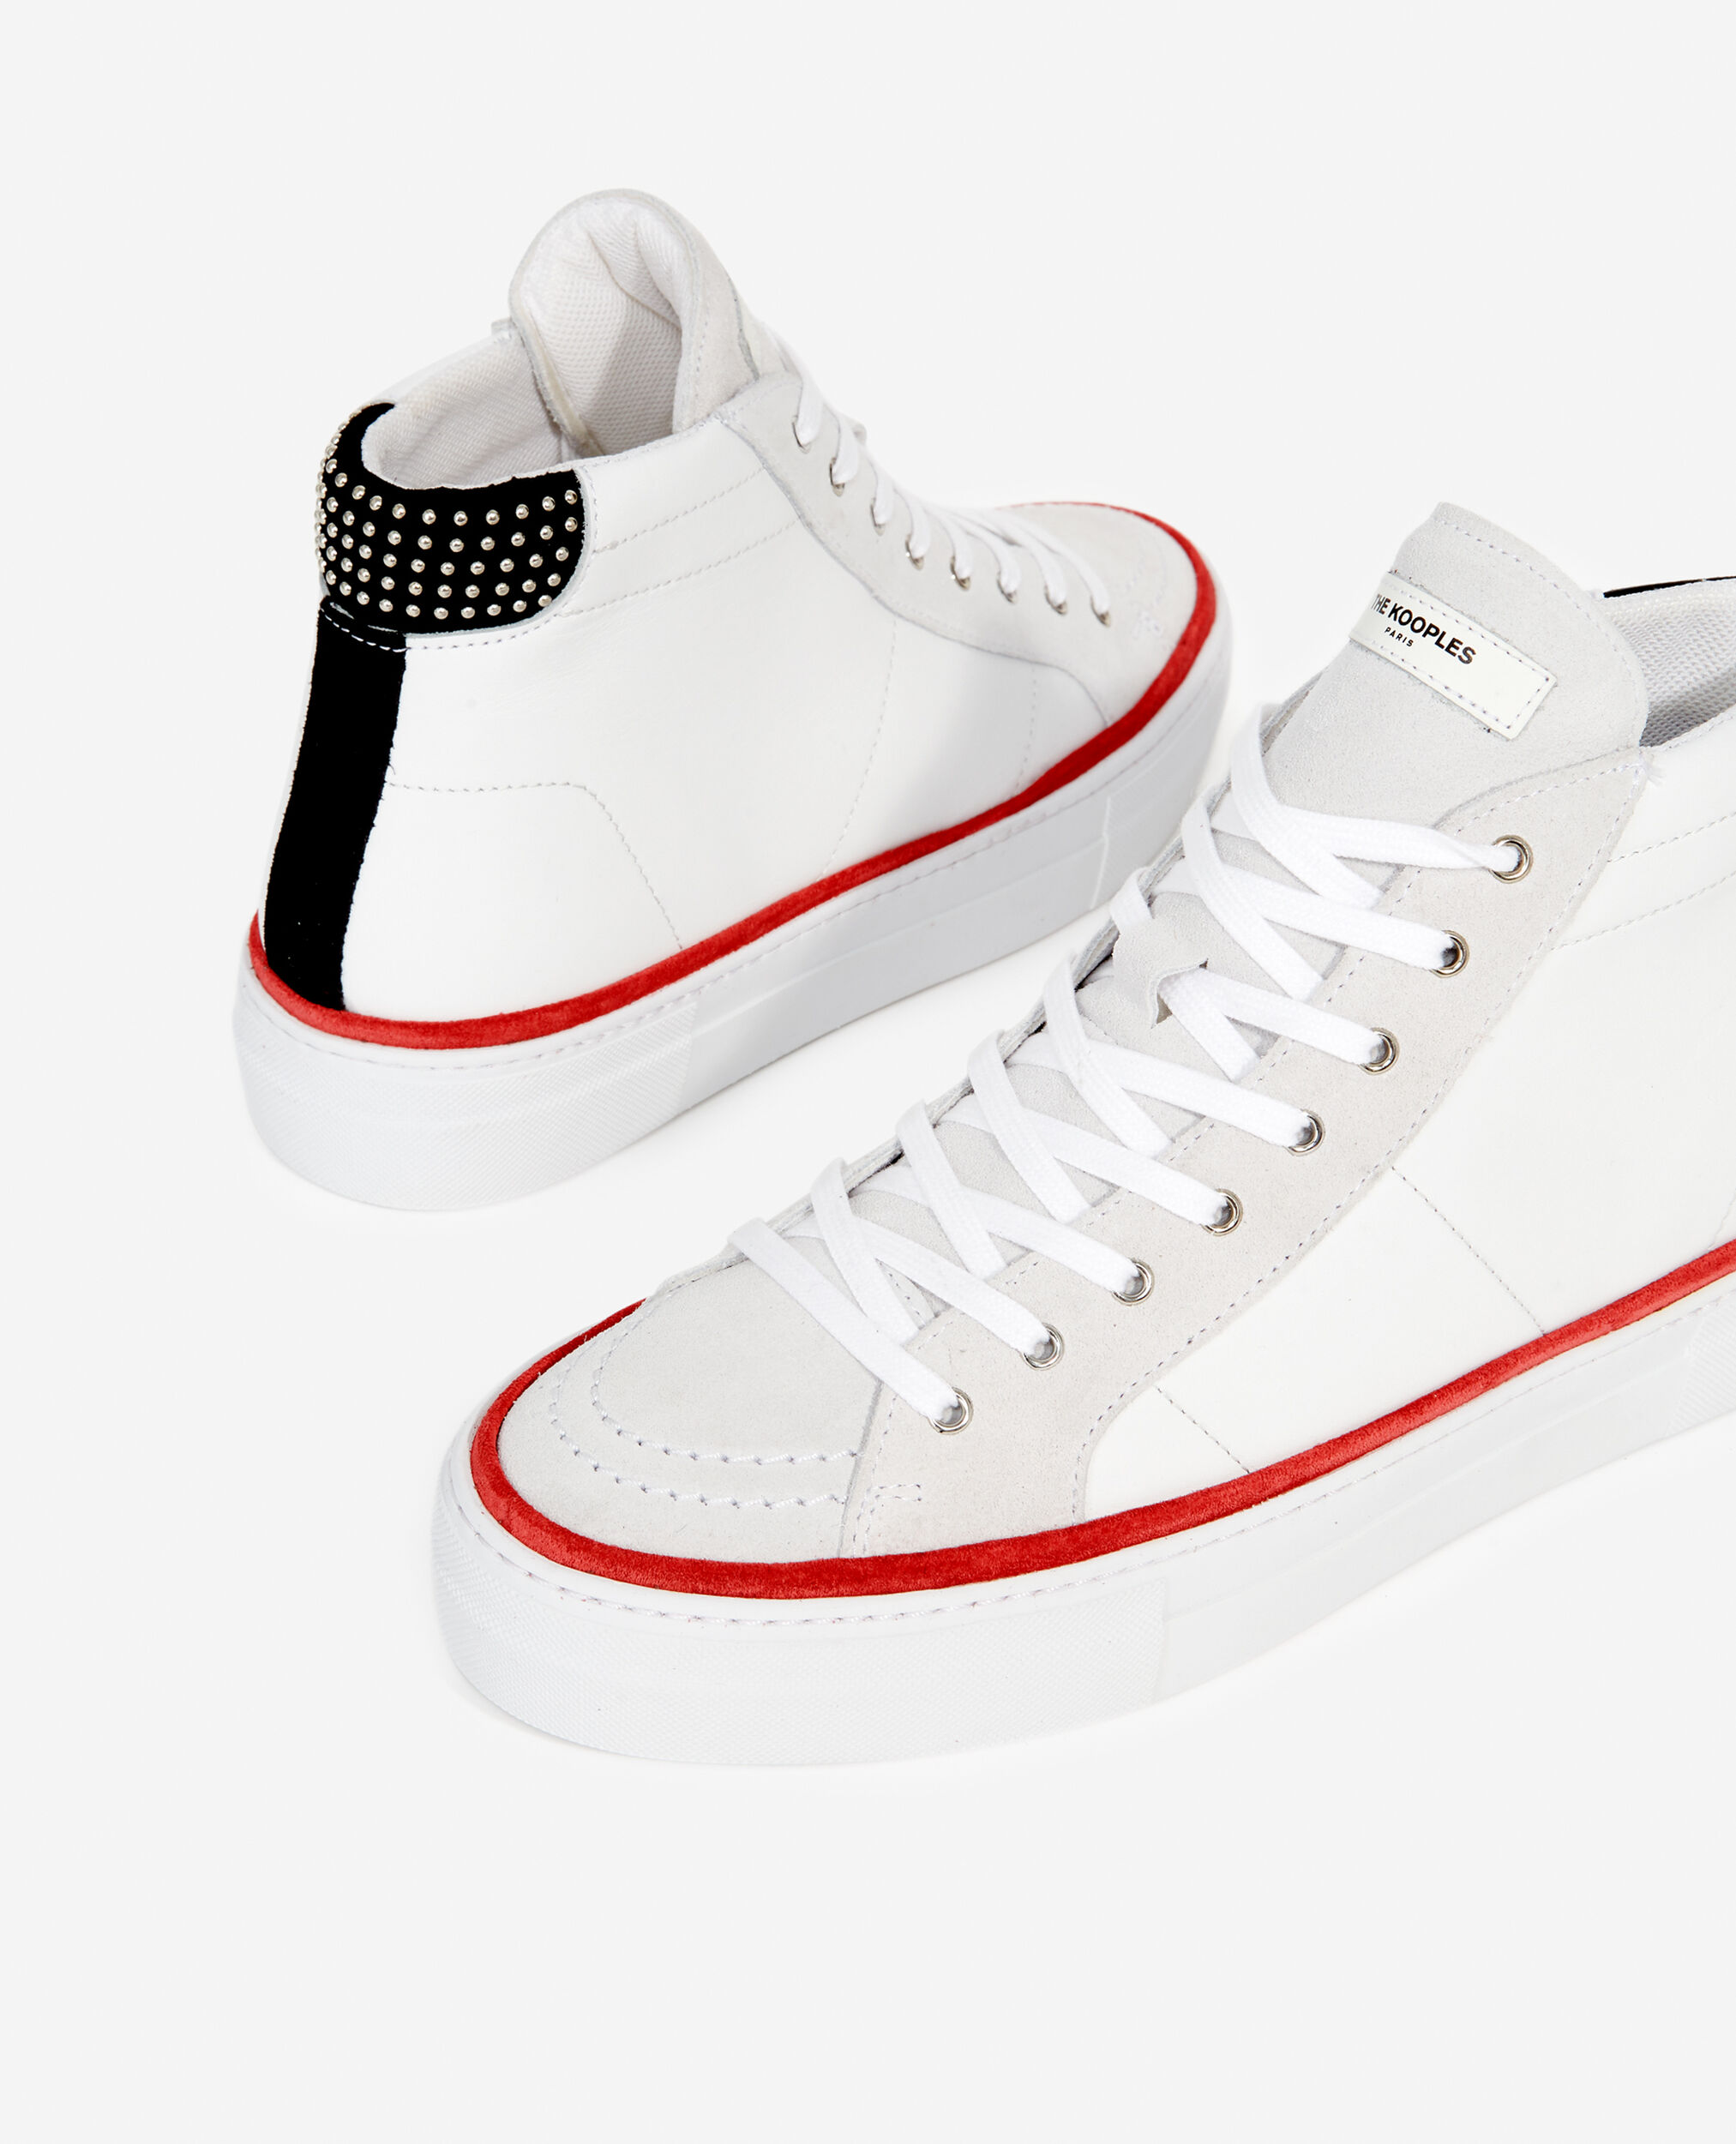 Turnschuhe weiß Leder Farbdetails, WHITE / GREY / RED, hi-res image number null